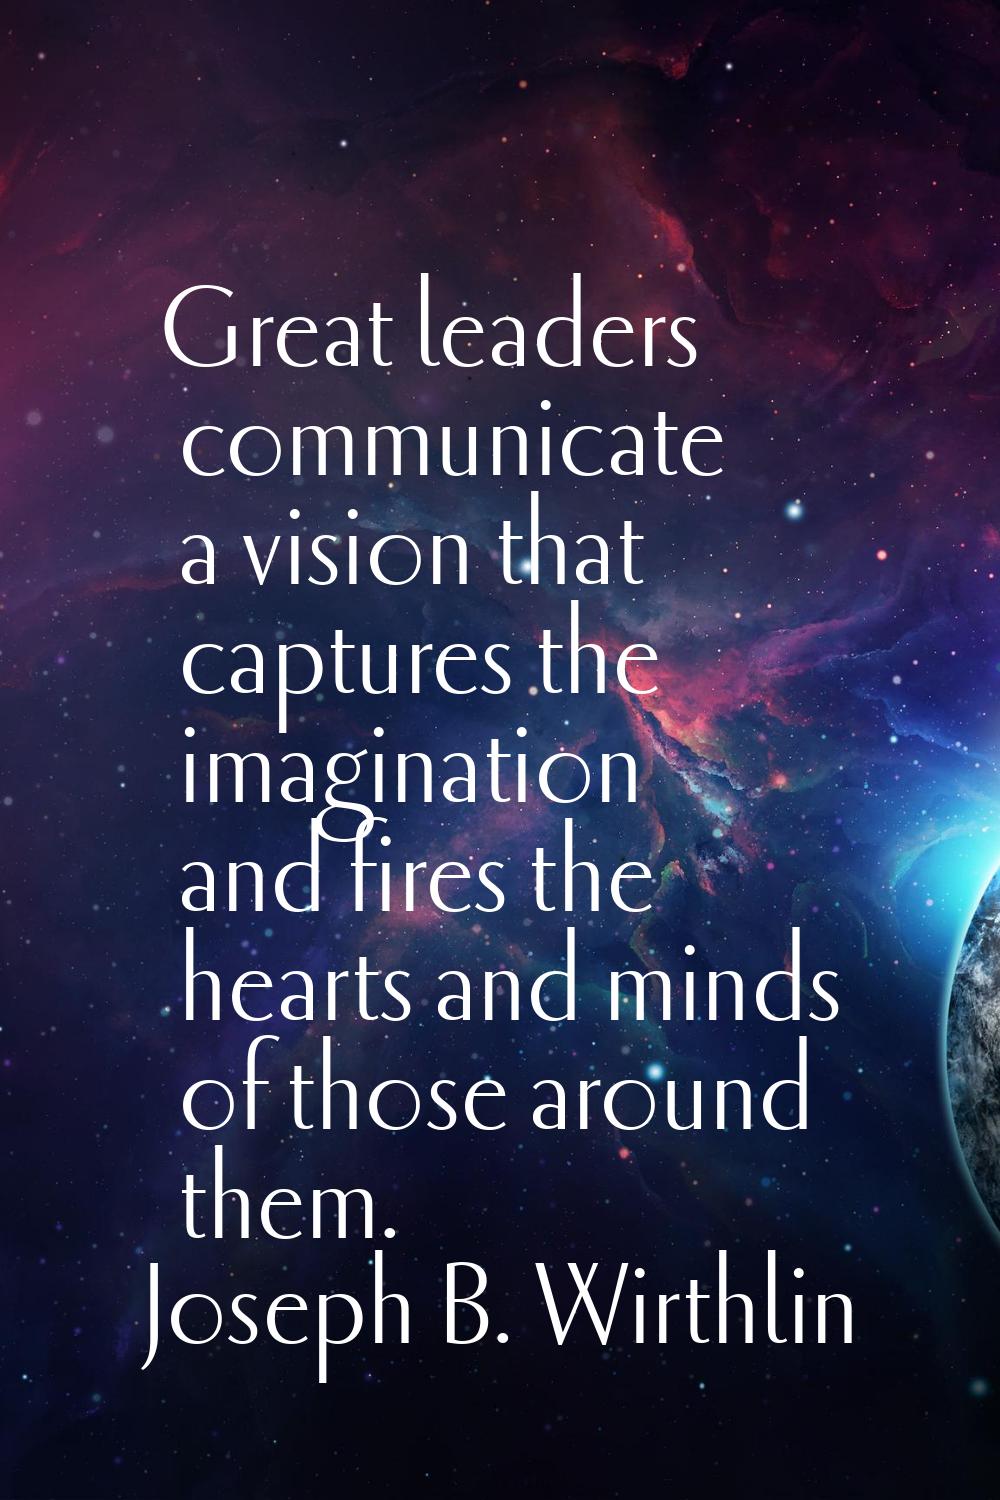 Great leaders communicate a vision that captures the imagination and fires the hearts and minds of 